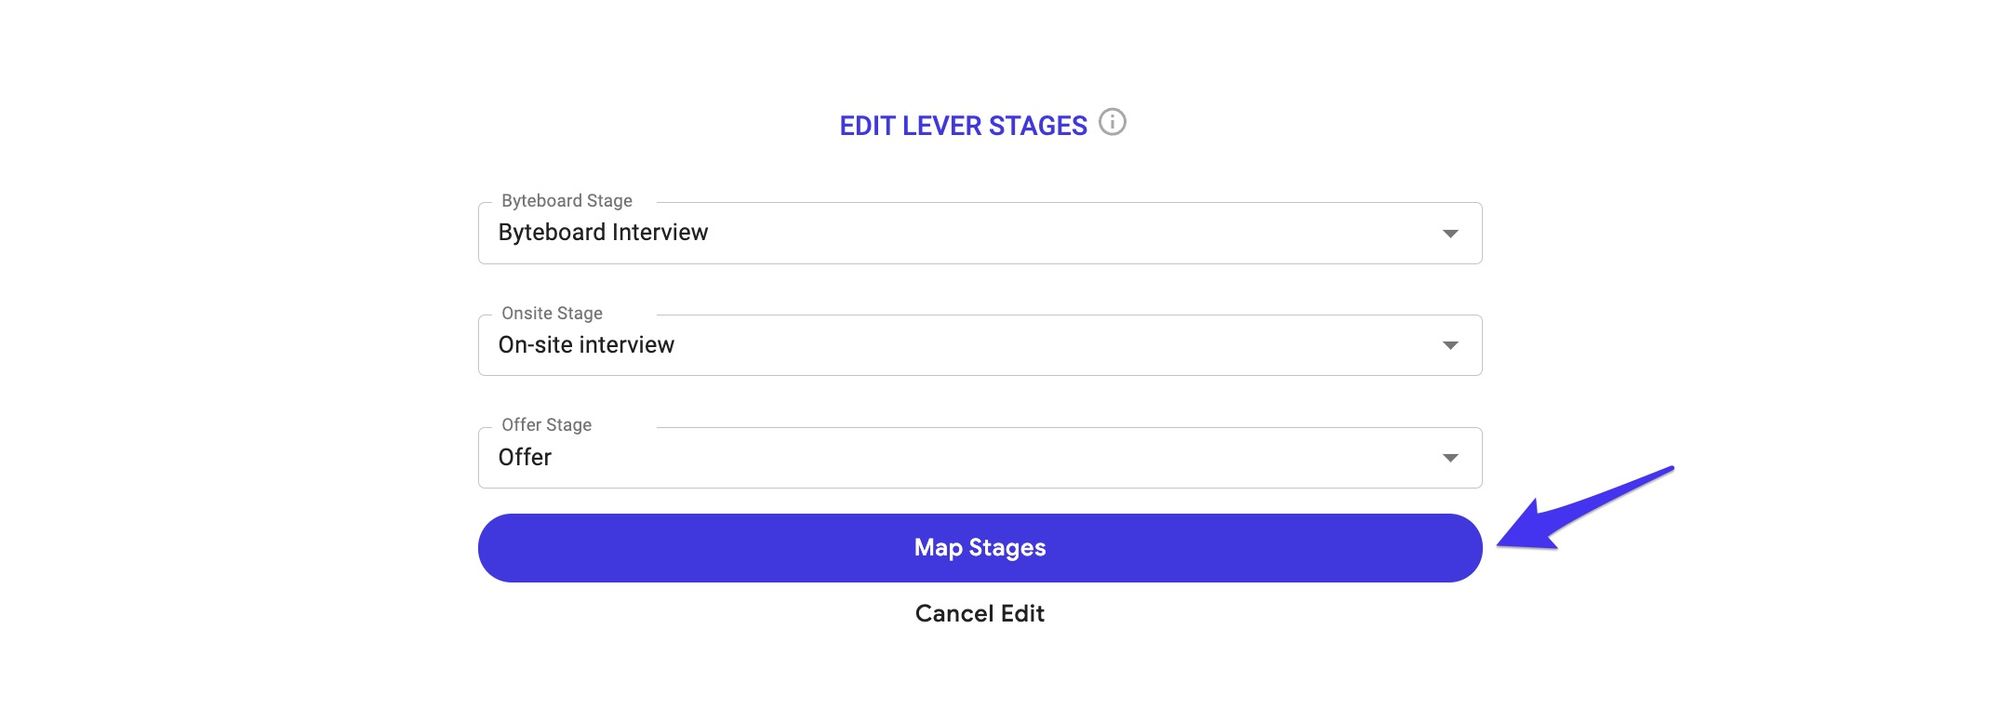 *Note — the stage names in your Lever instance will likely be different from the examples here